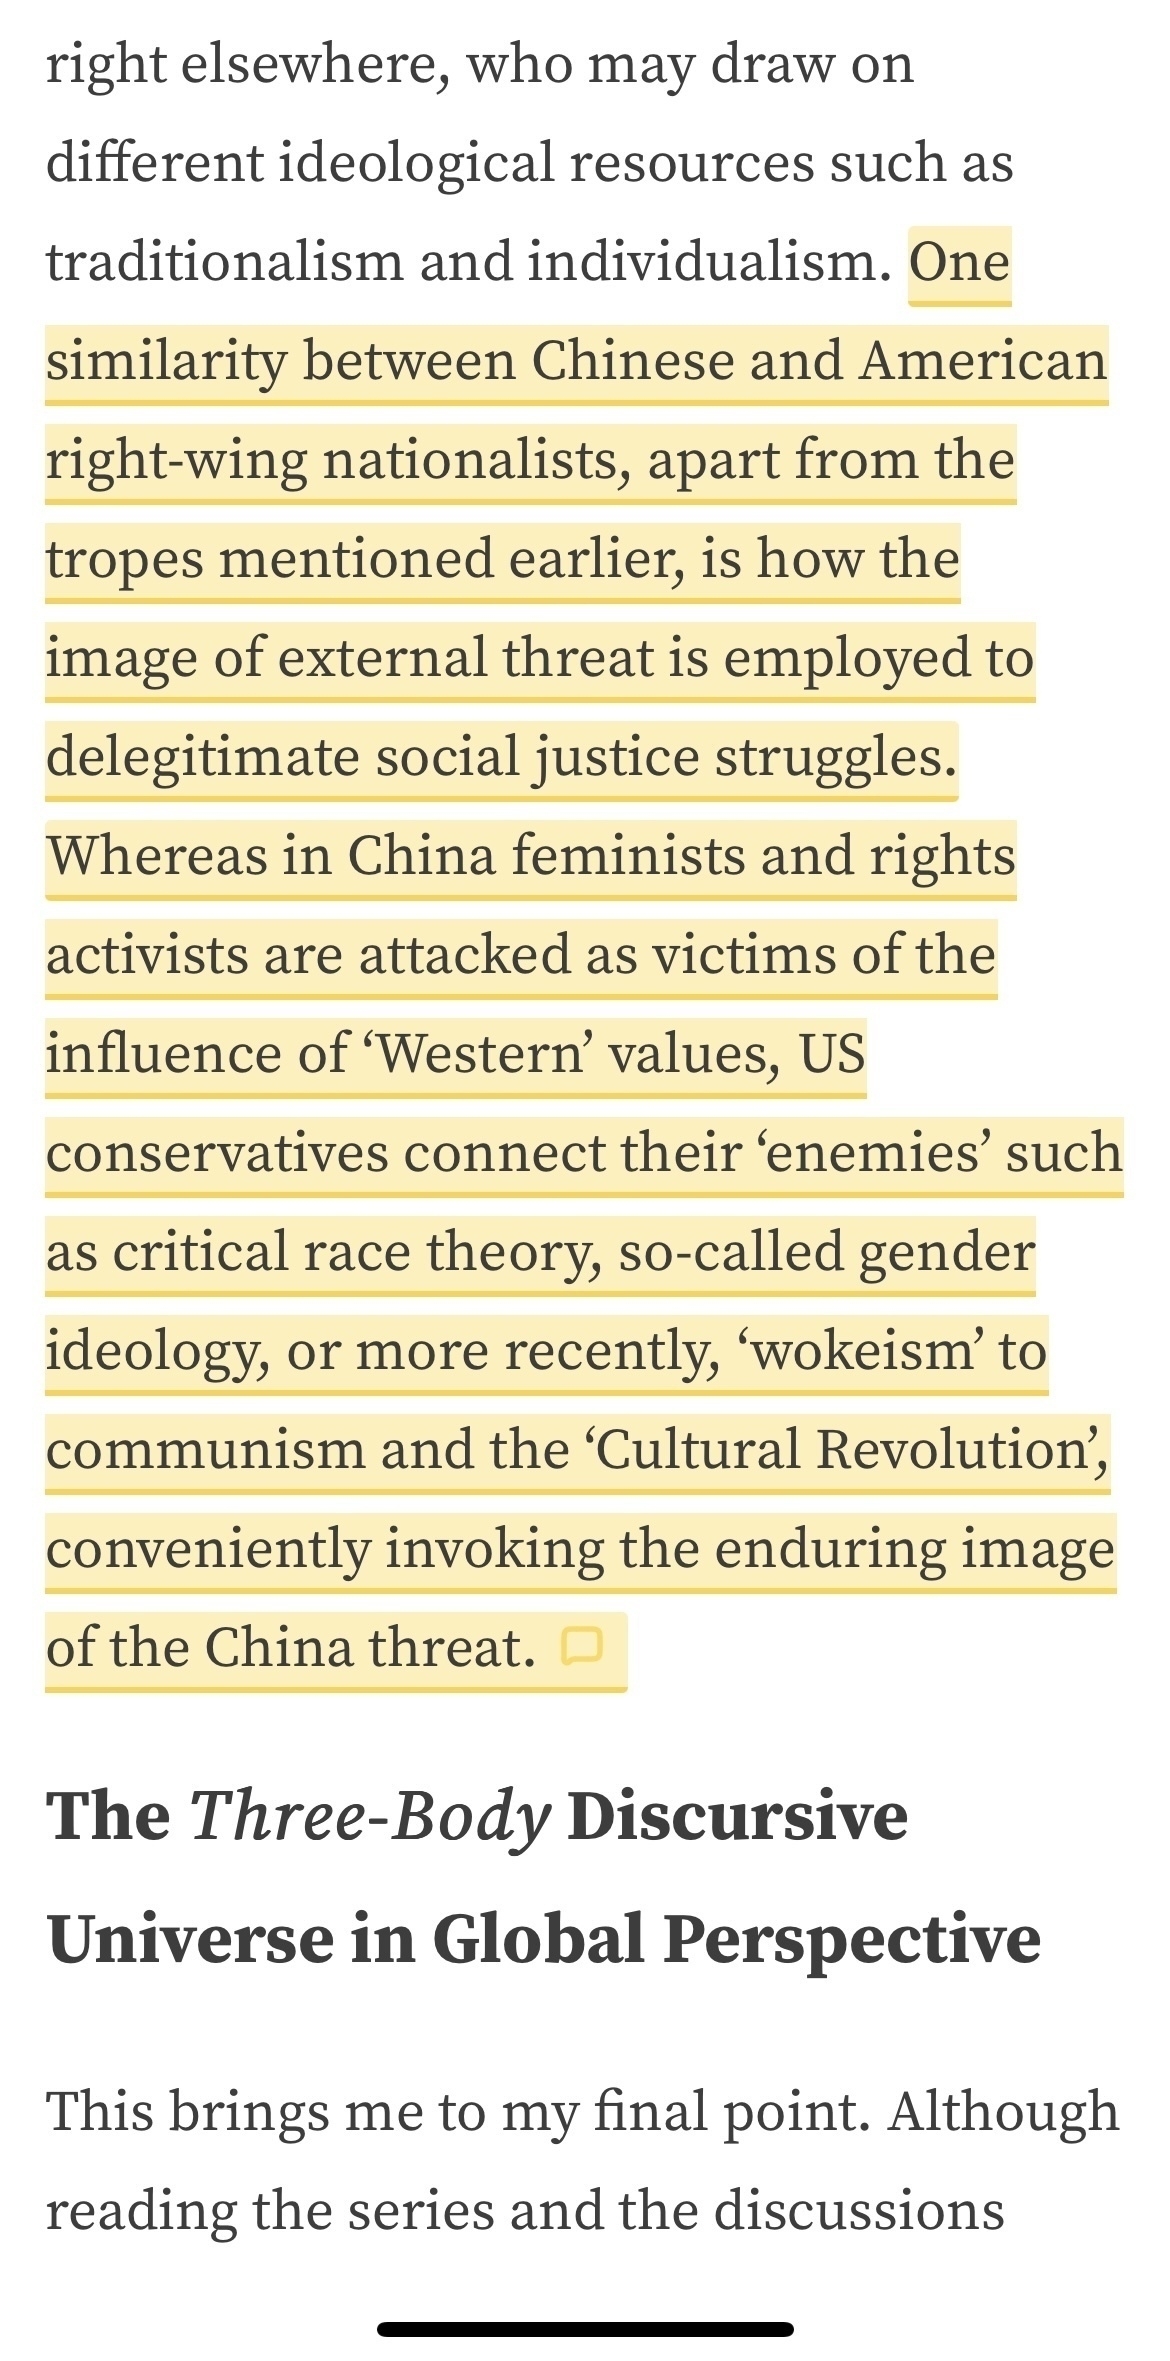 Screencap of the article with the following bit highlighted, “One similarity between Chinese and American right-wing nationalists, apart from the tropes mentioned earlier, is how the image of external threat is employed to delegitimate social justice struggles.&10;Whereas in China feminists and rights activists are attacked as victims of the influence of 'Western' values, US&10;conservatives connect their 'enemies' such as critical race theory, so-called gender ideology, or more recently, 'wokeism' to communism and the 'Cultural Revolution',&10;conveniently invoking the enduring image of the China threat.”